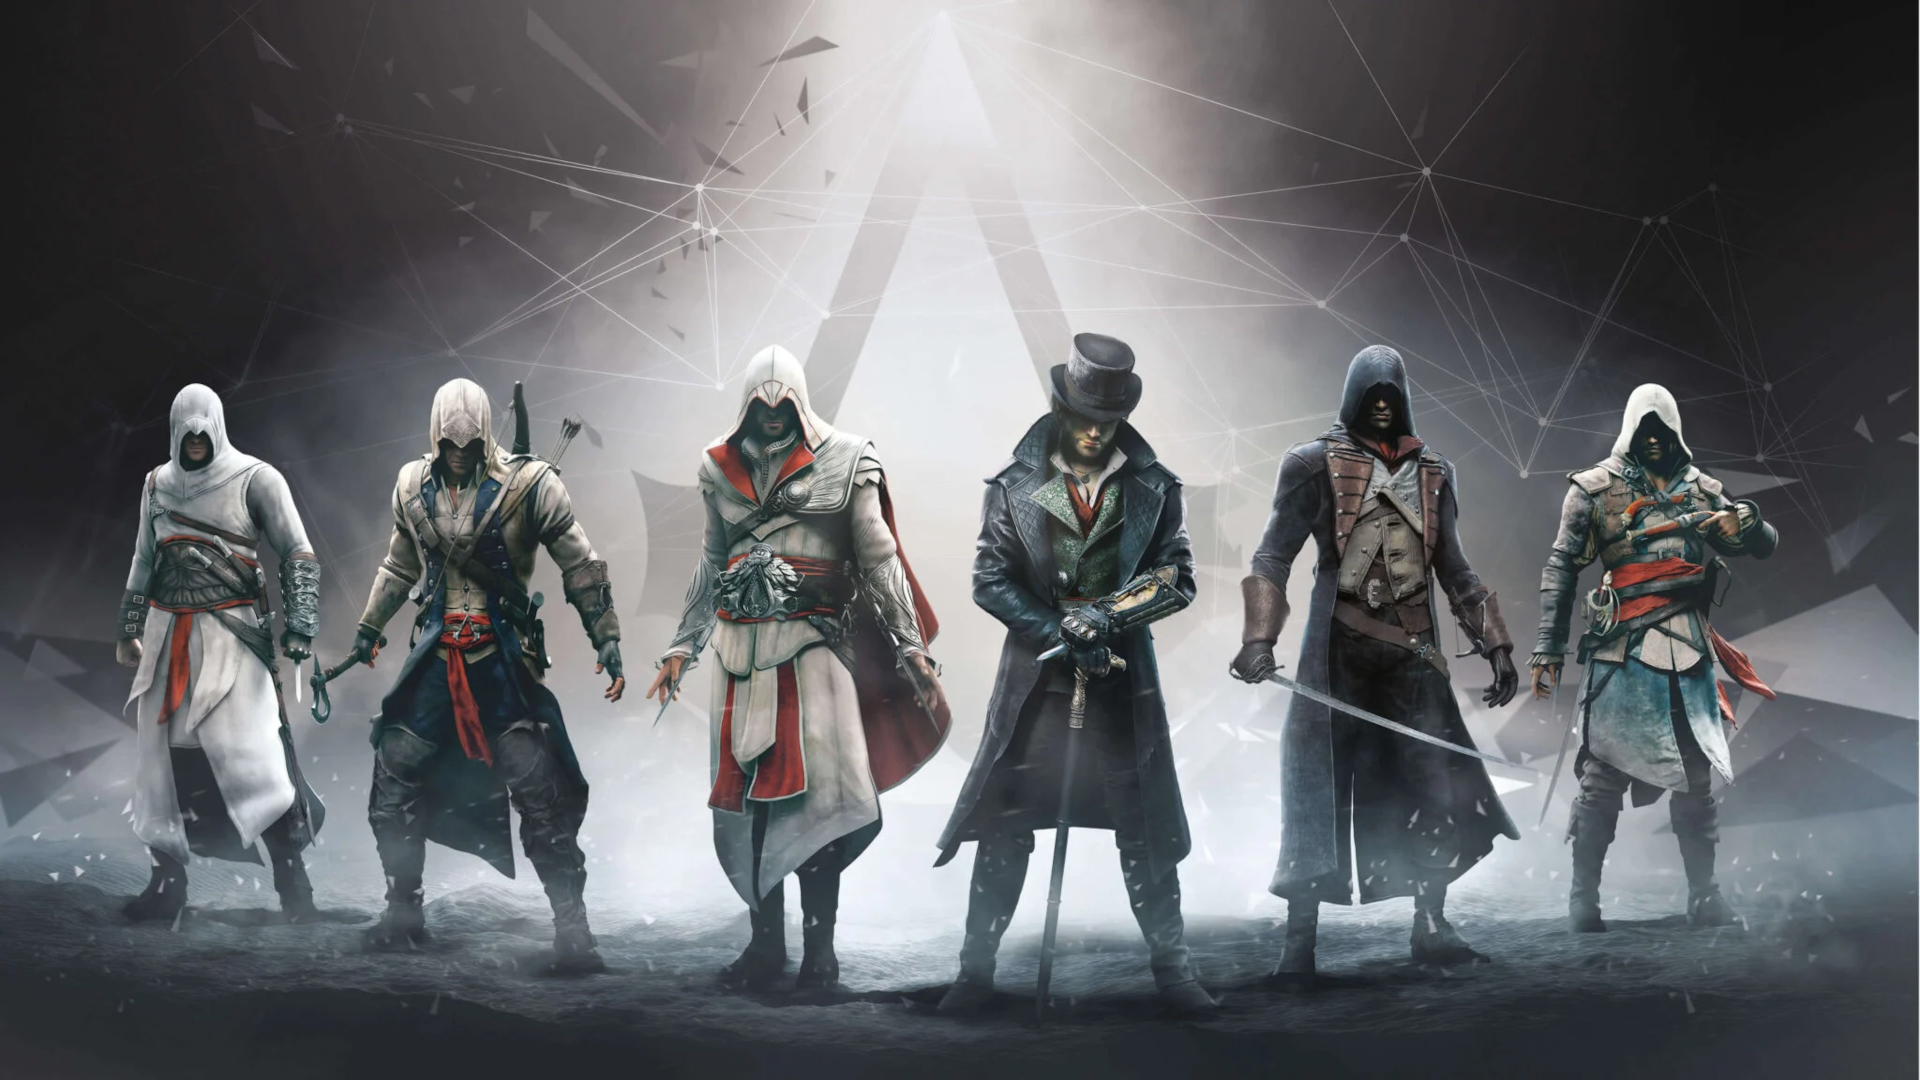 A leap of faith in the T-Pose, characters from different eras and a year-long release -- rumors about Assassin's Creed for VR